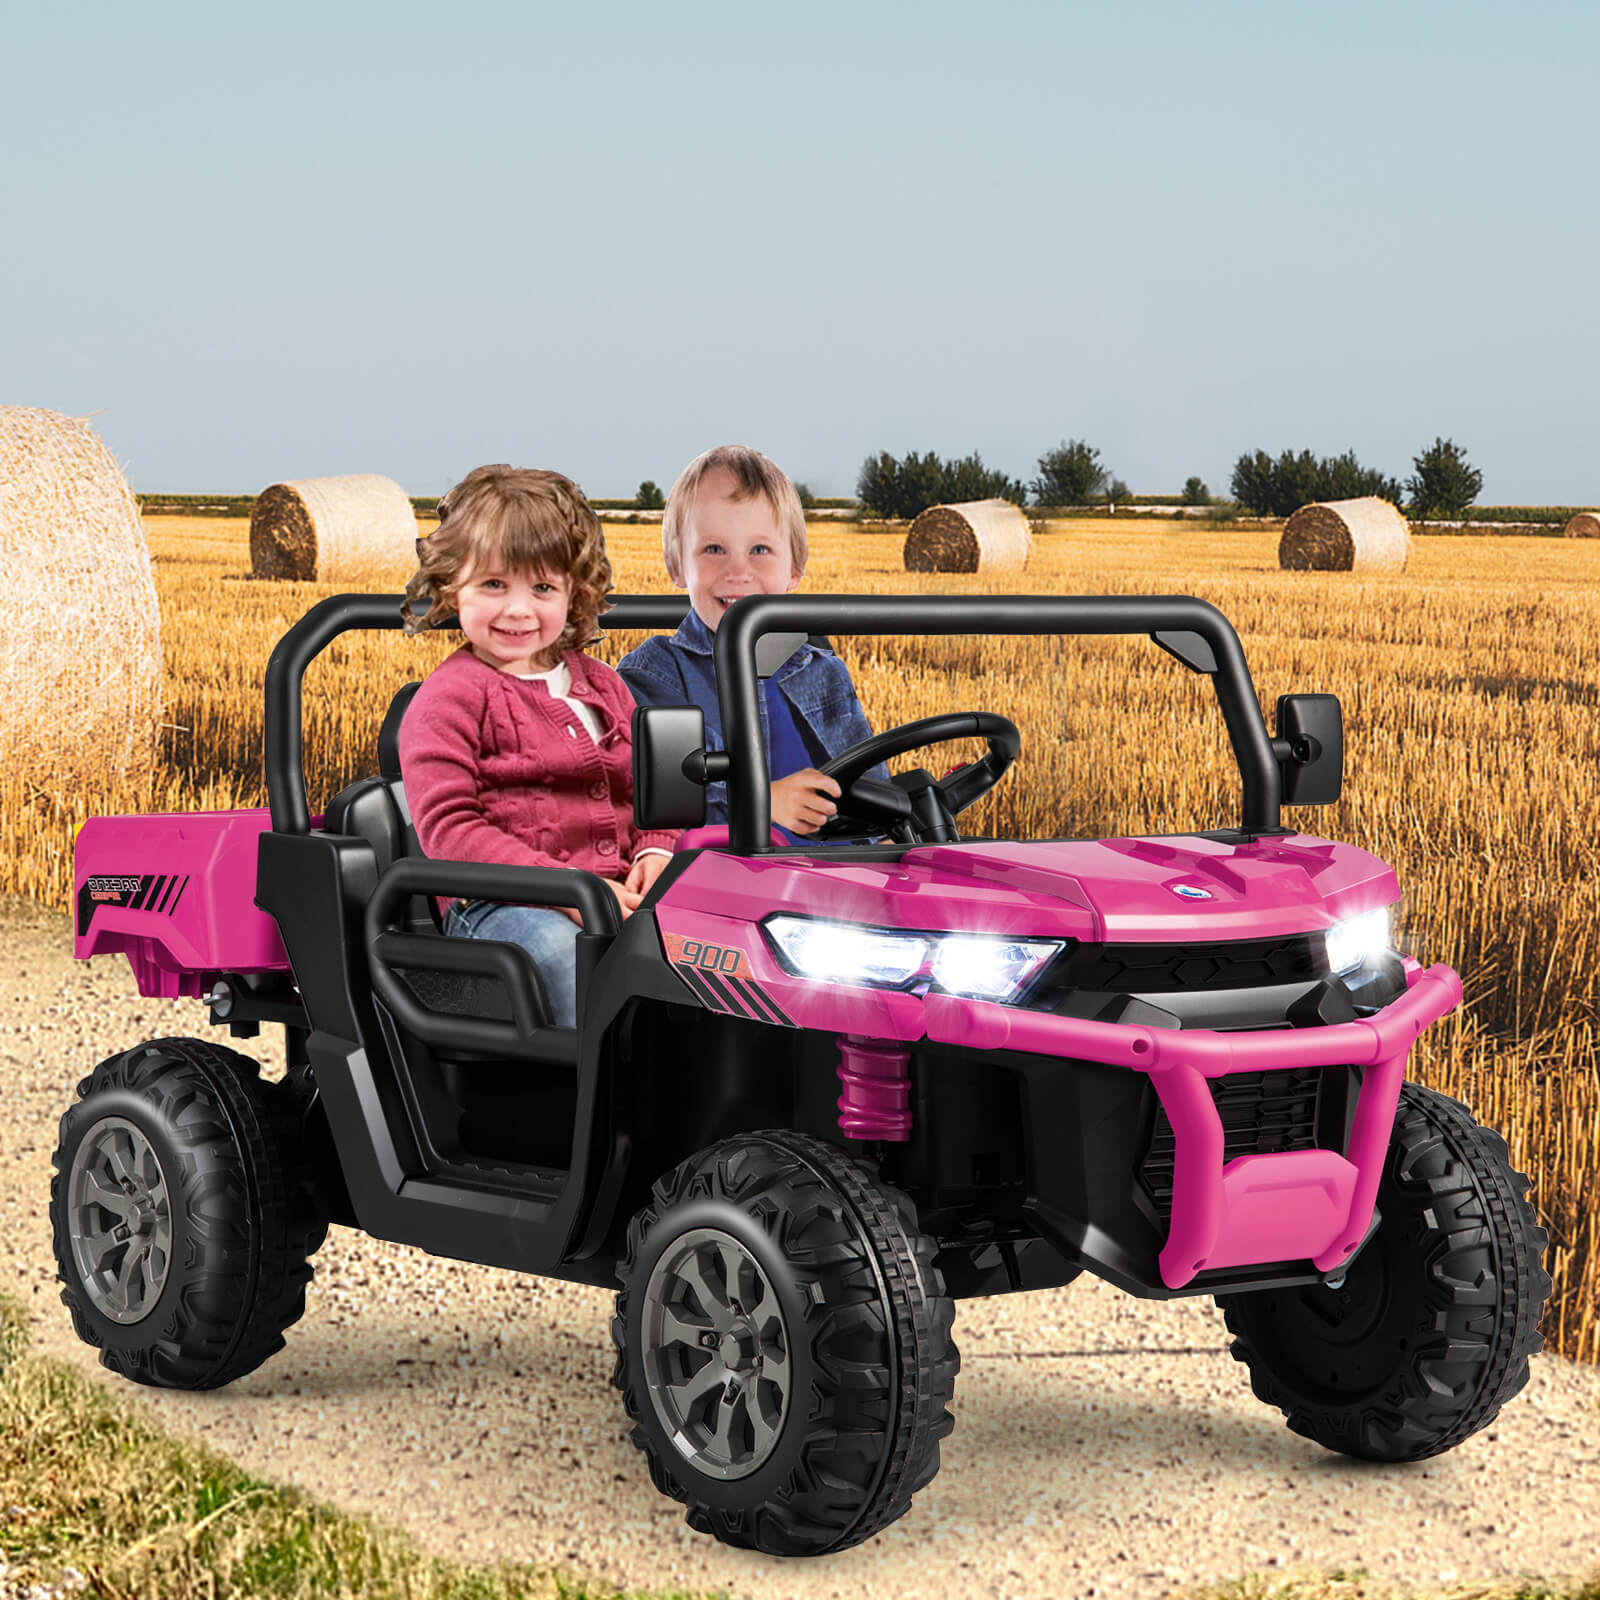 Safety is a Priority: We prioritize your child's safety above all else. Crafted from high-quality PP and heavy-duty steel, our off-road vehicle is sturdy and durable, built to withstand the test of time. The spacious seat with an adjustable safety belt, lockable doors, and soft start technology are designed to protect your kids from potential hazards.